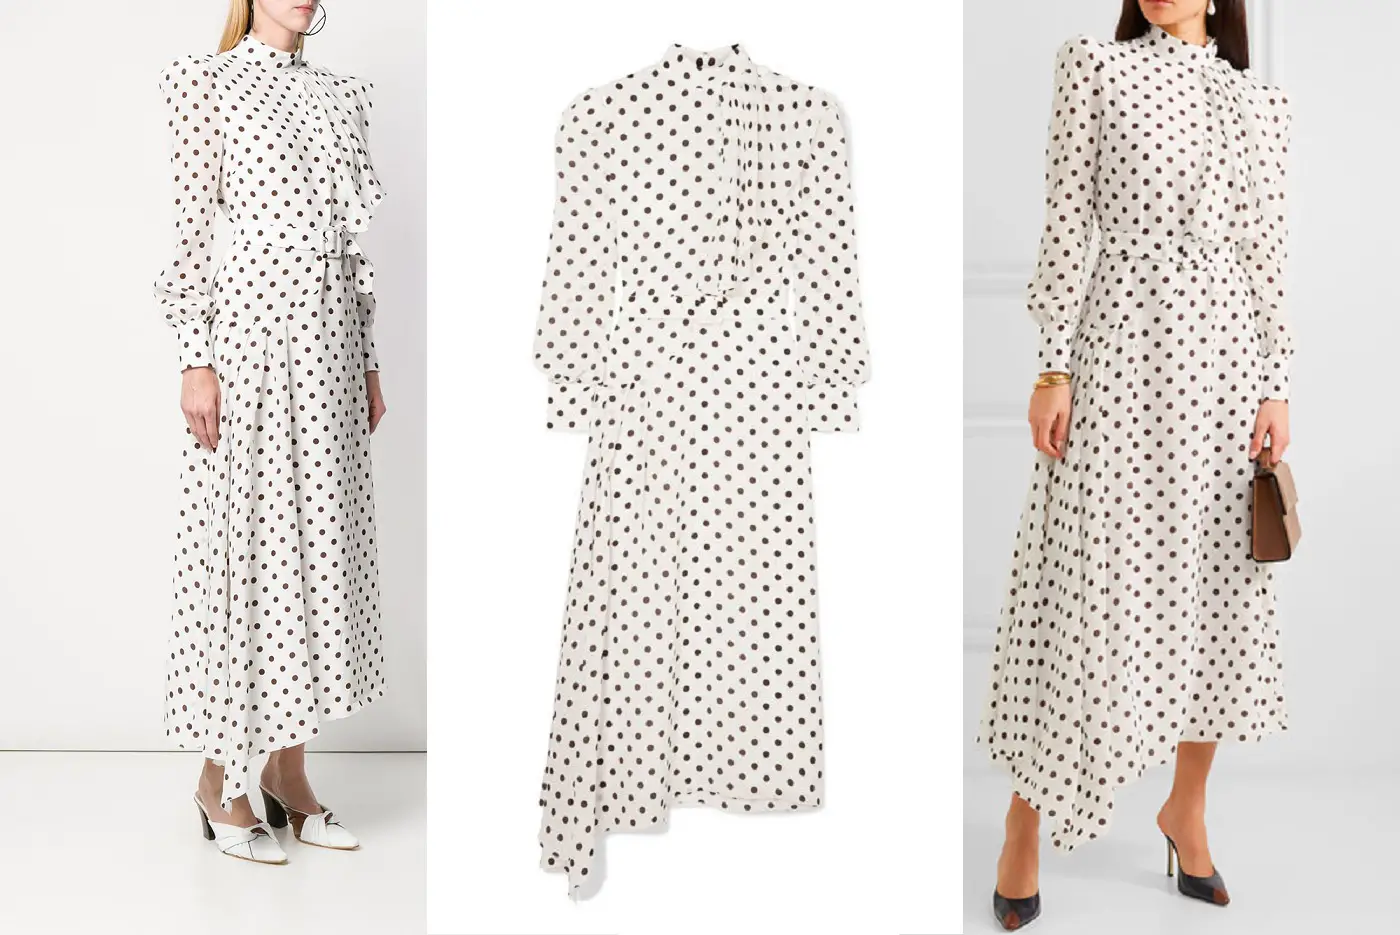 The Duchess of Cambridge wore Alessandra Rich Belted Polka Dot Dress